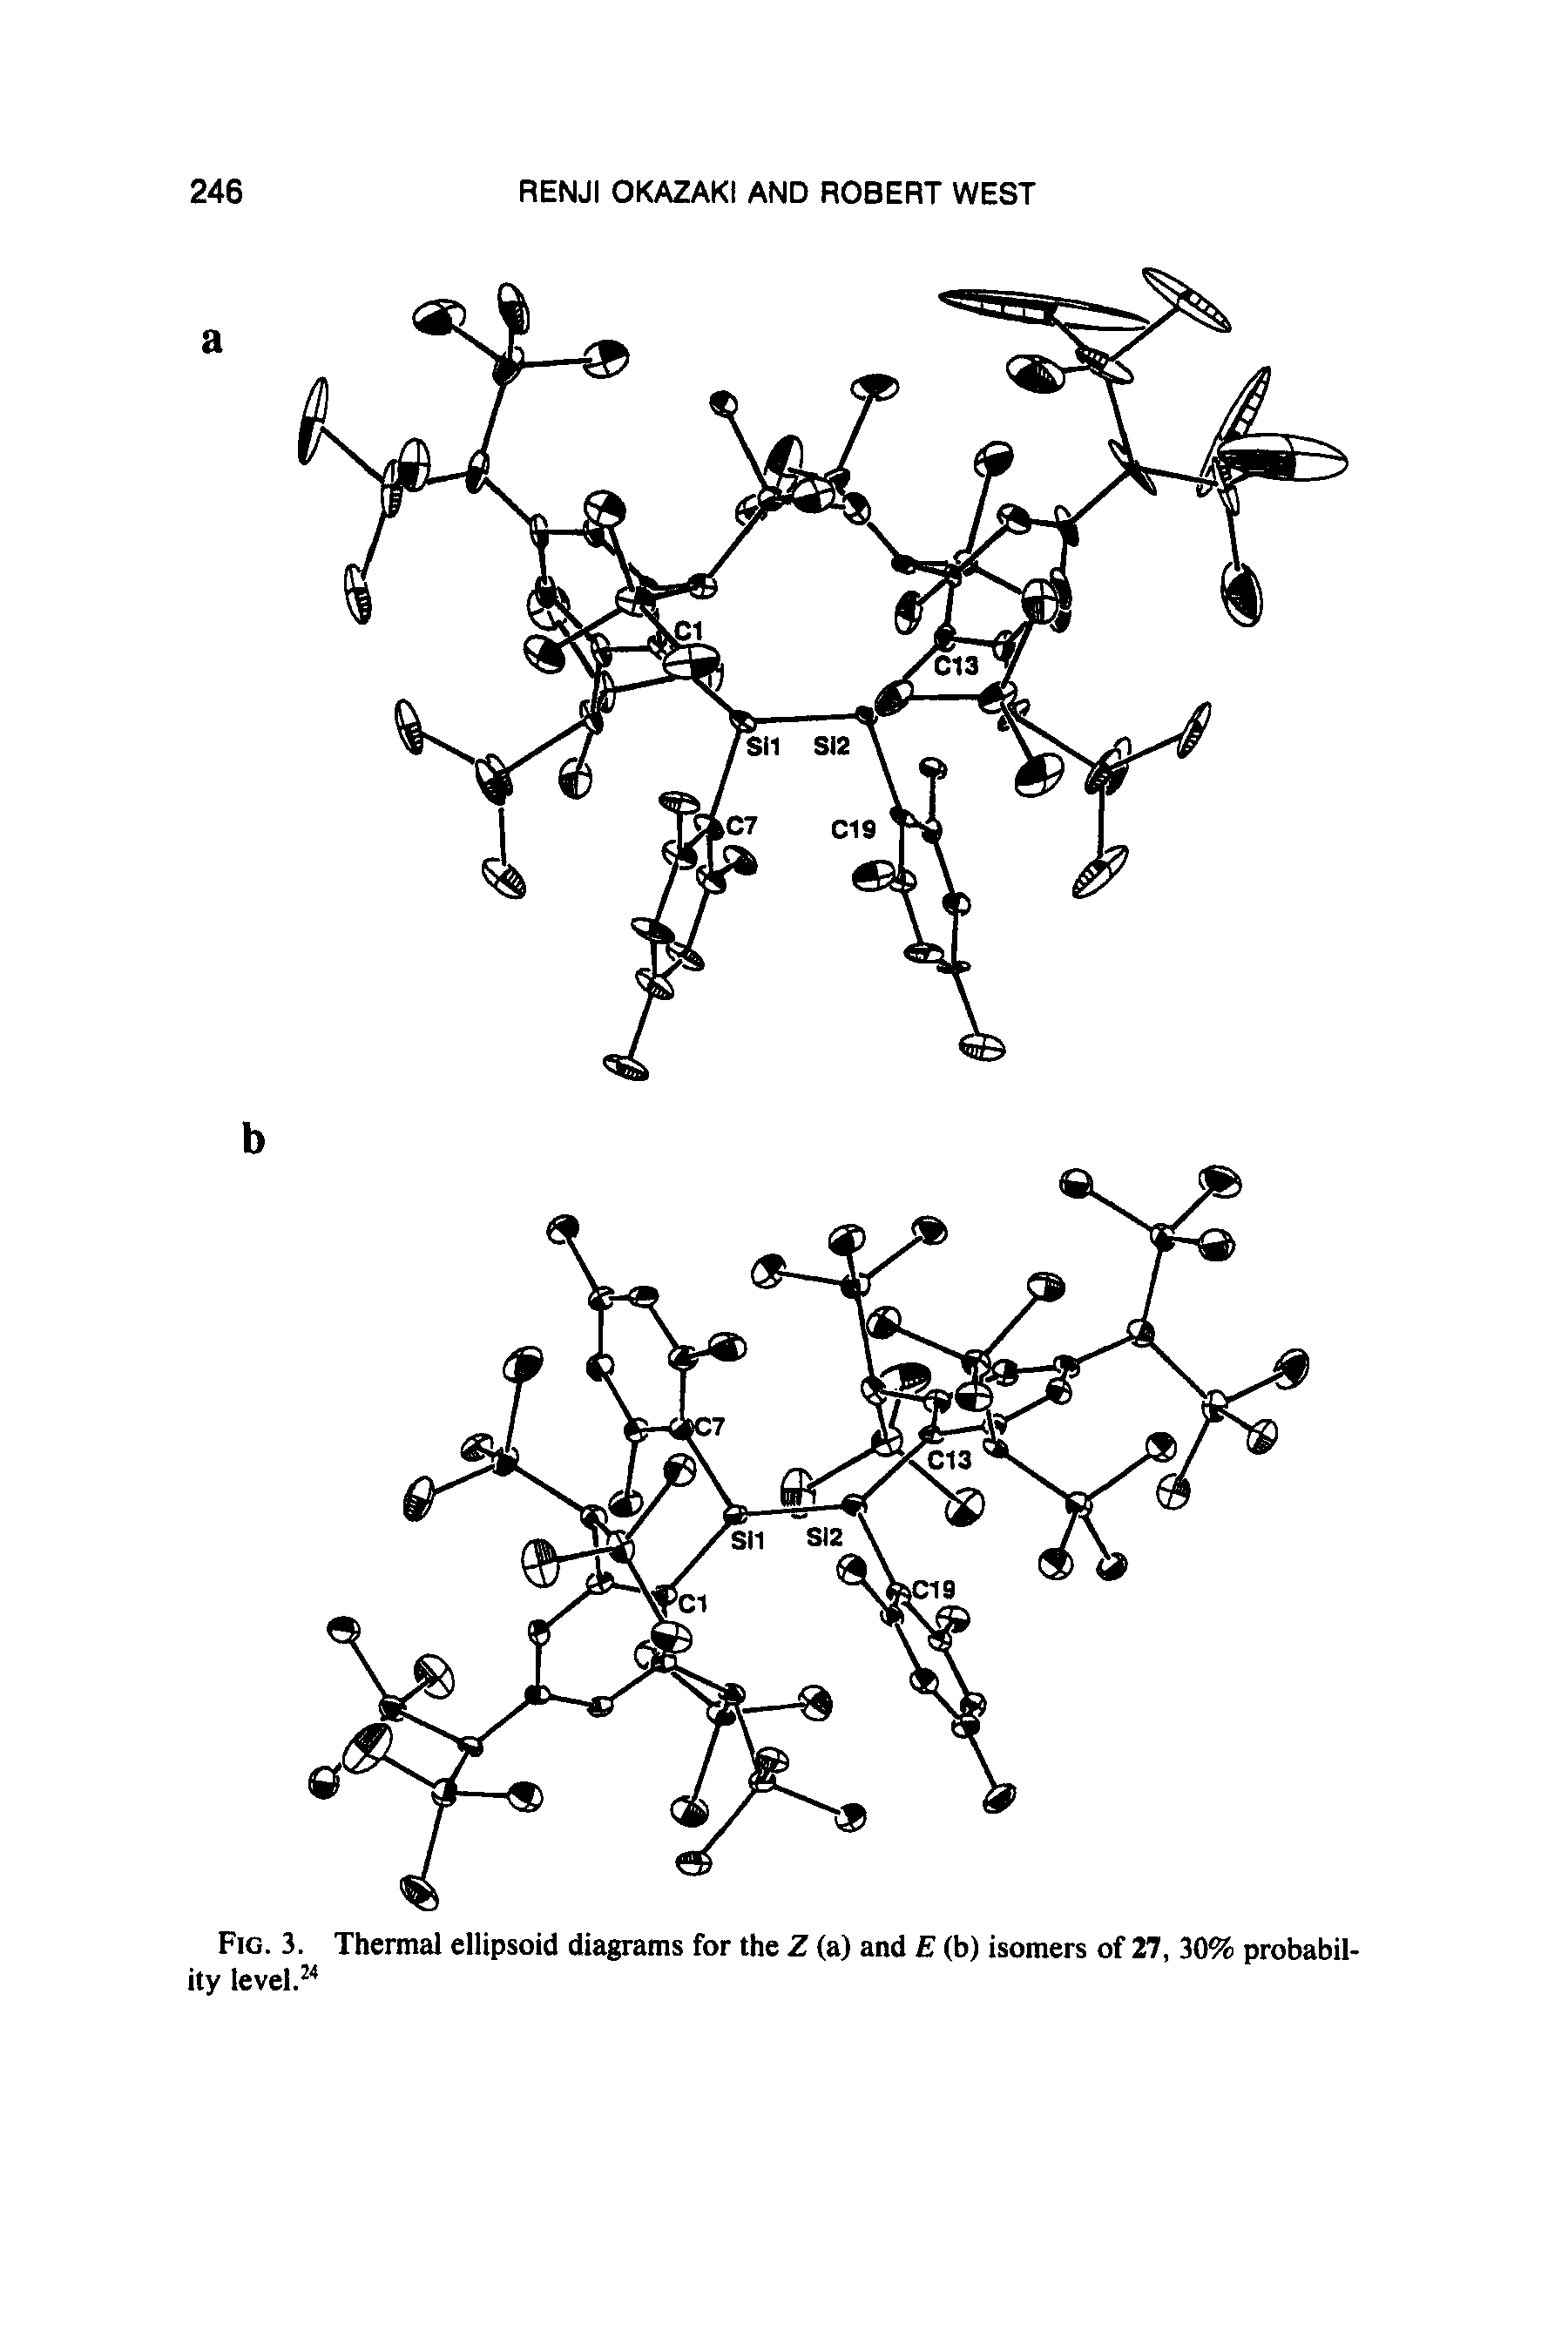 Fig. 3. Thermal ellipsoid diagrams for the Z (a) and E (b) isomers of 27, 30% probability level.24...